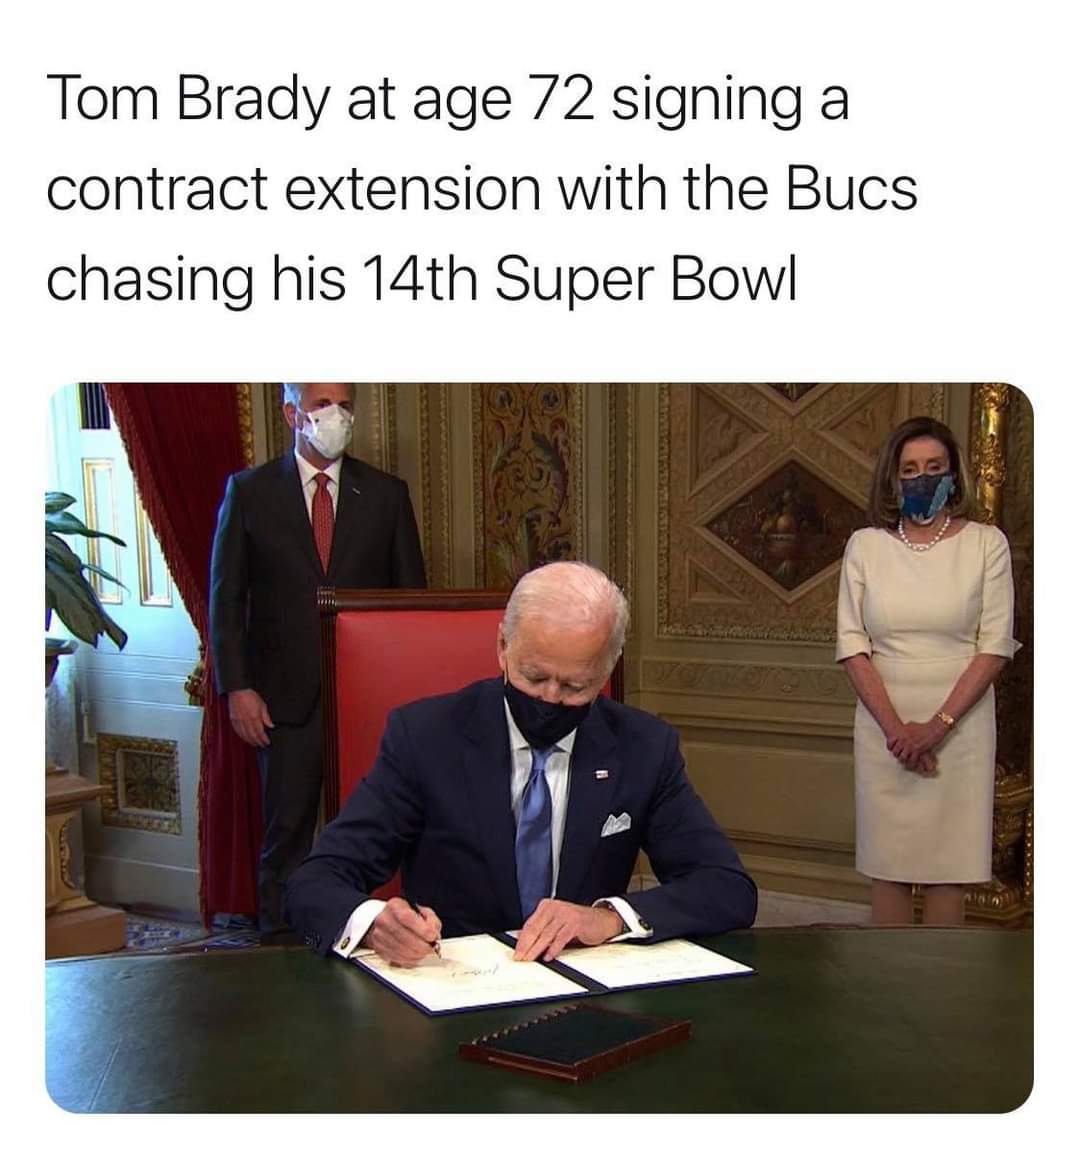 presentation - Tom Brady at age 72 signing a contract extension with the Bucs chasing his 14th Super Bowl Eft